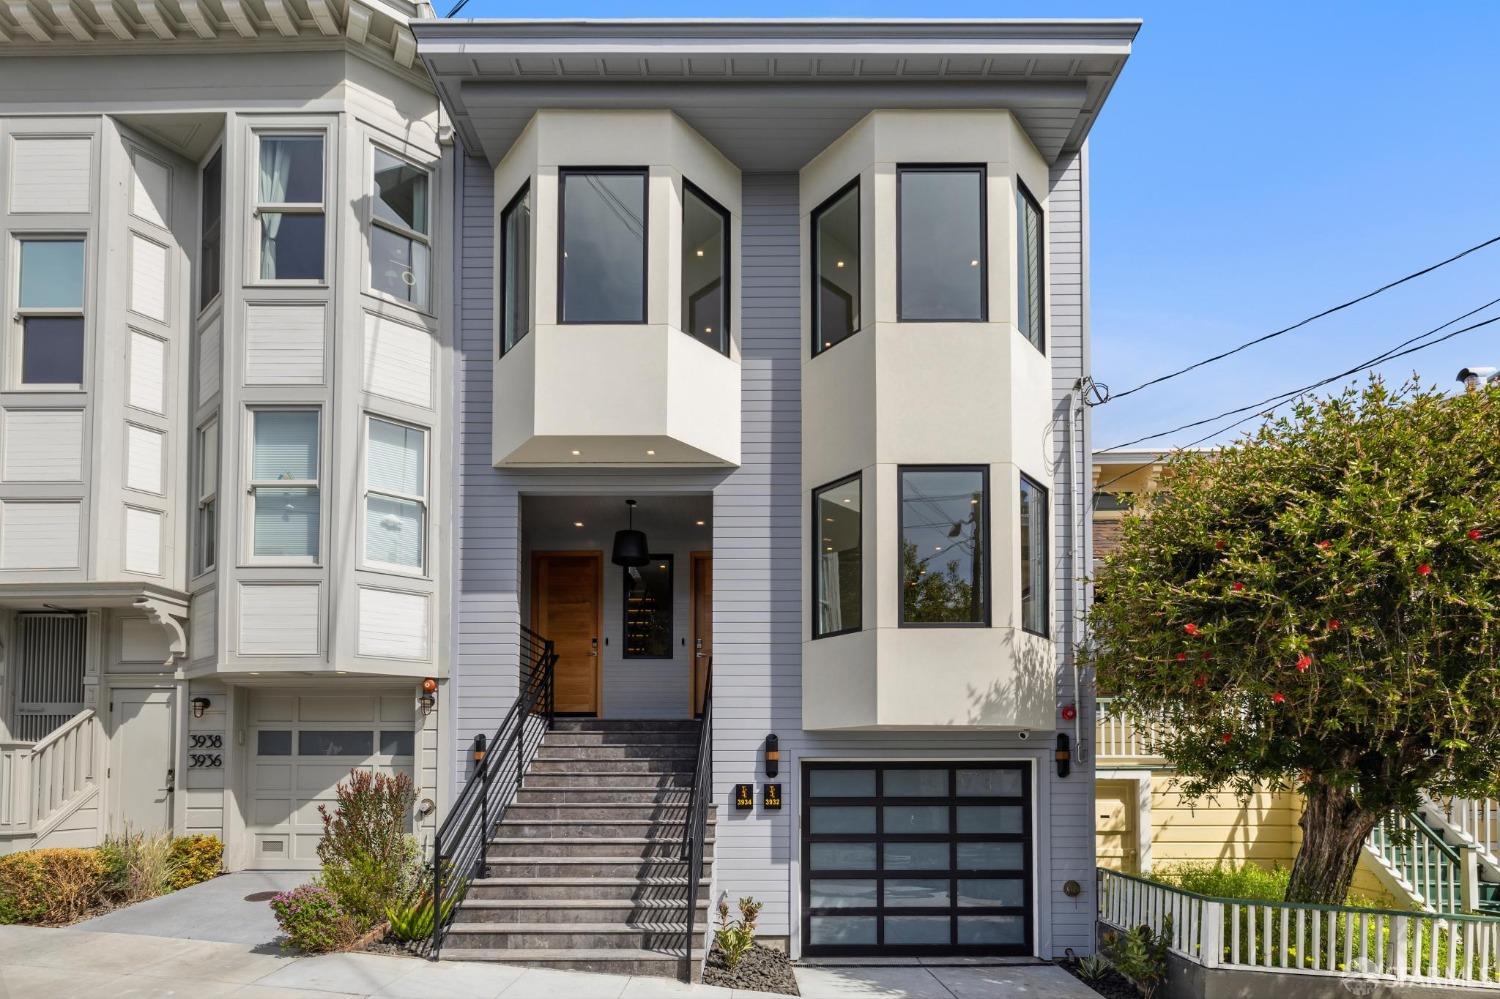 Photo of 3932-3934 26th St in San Francisco, CA